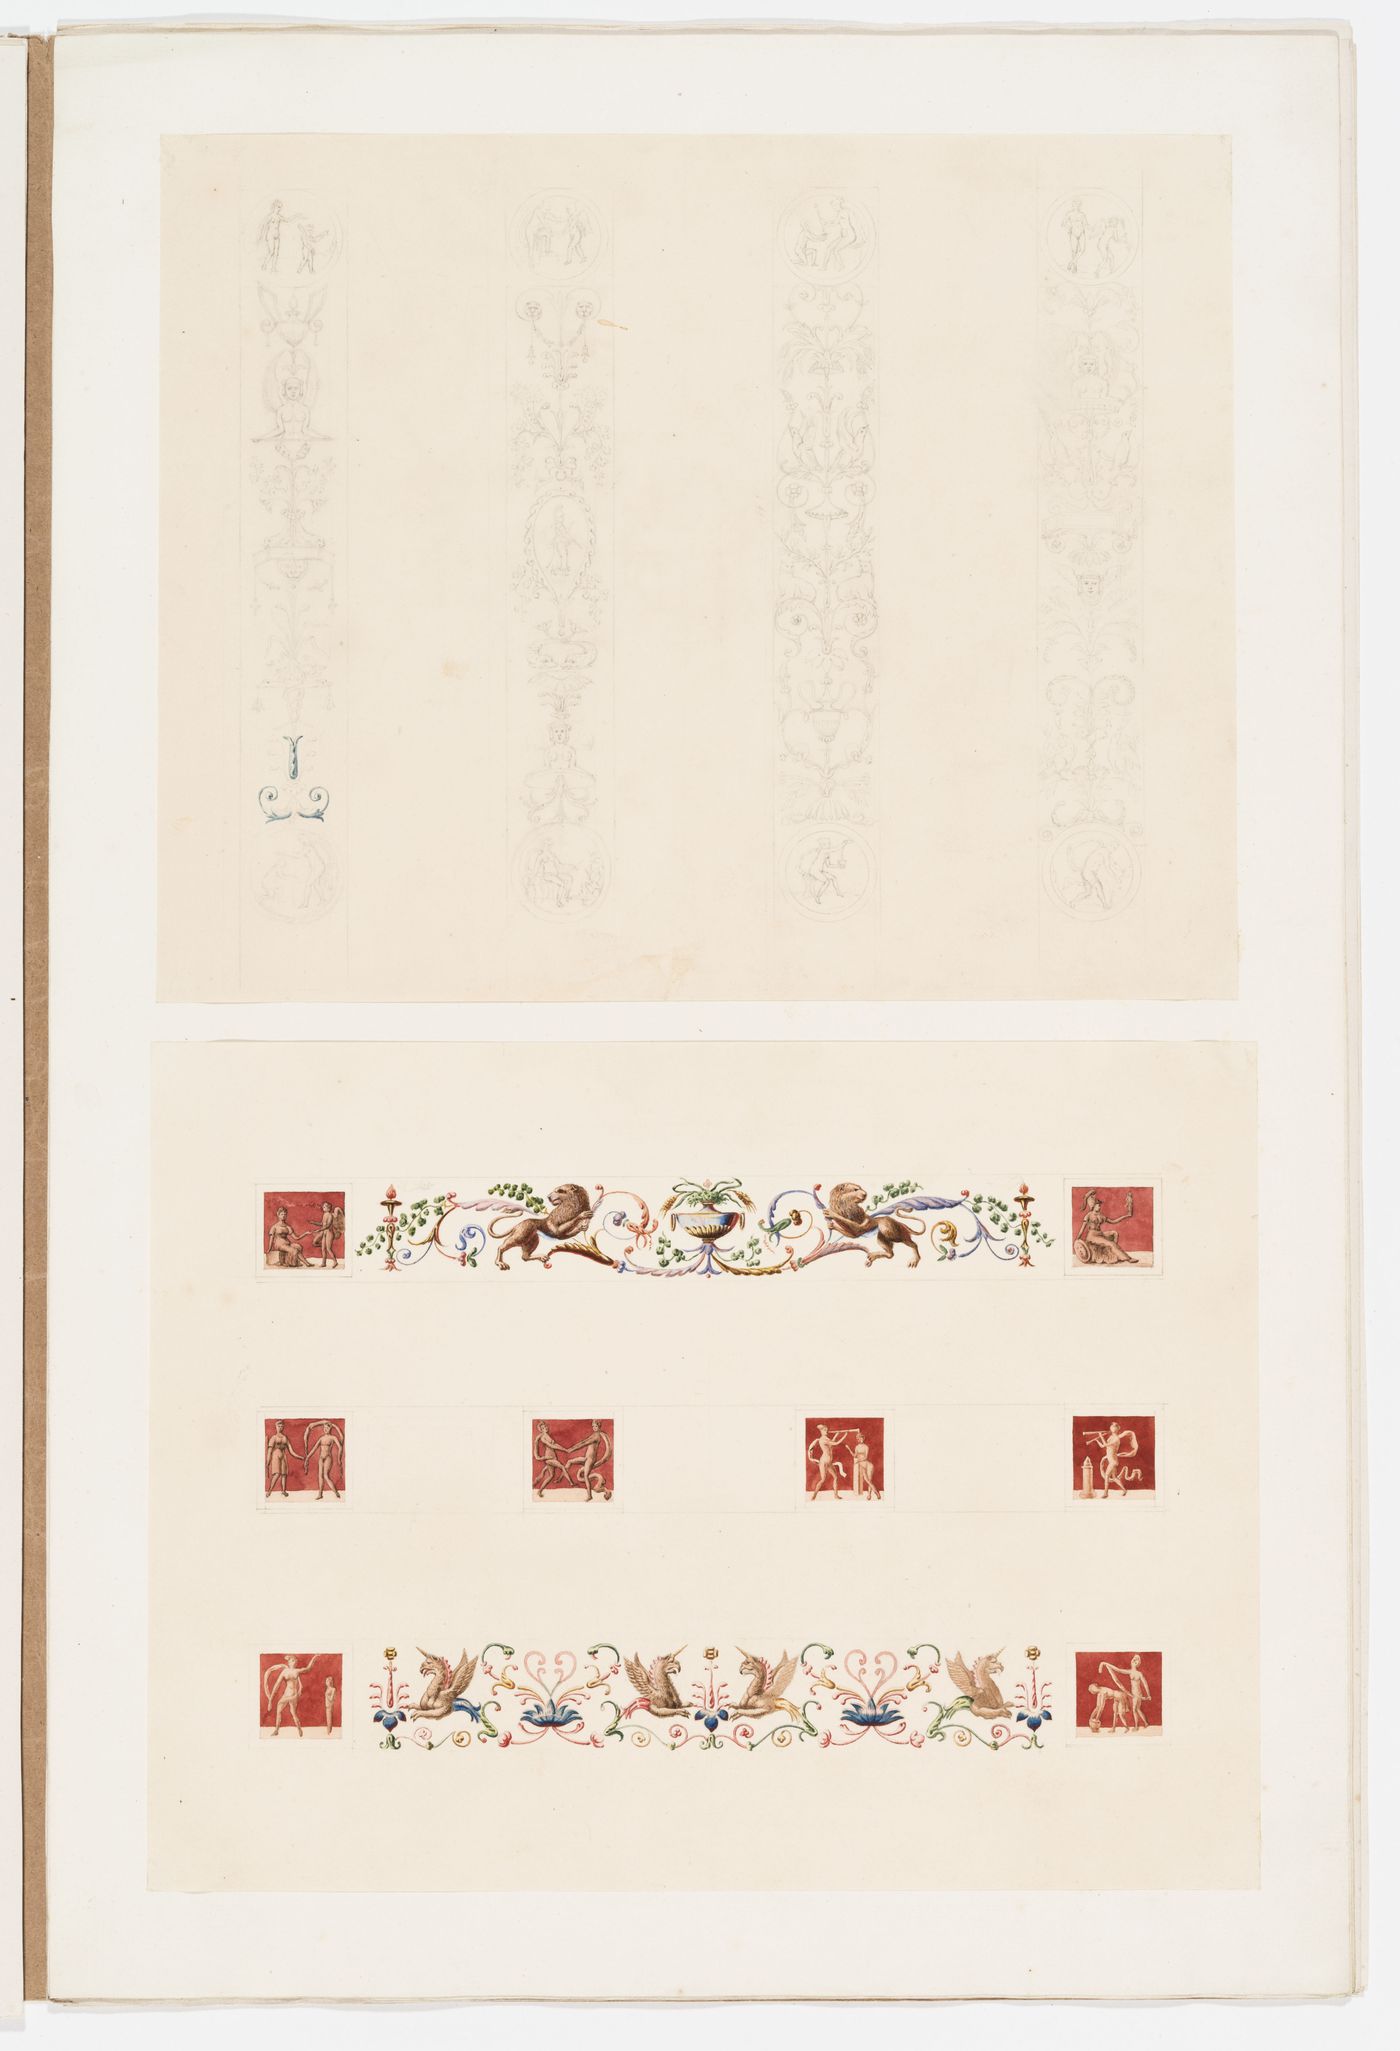 Ornament drawings of bands with decorated with grotesques and panels decorated with figurative ornament